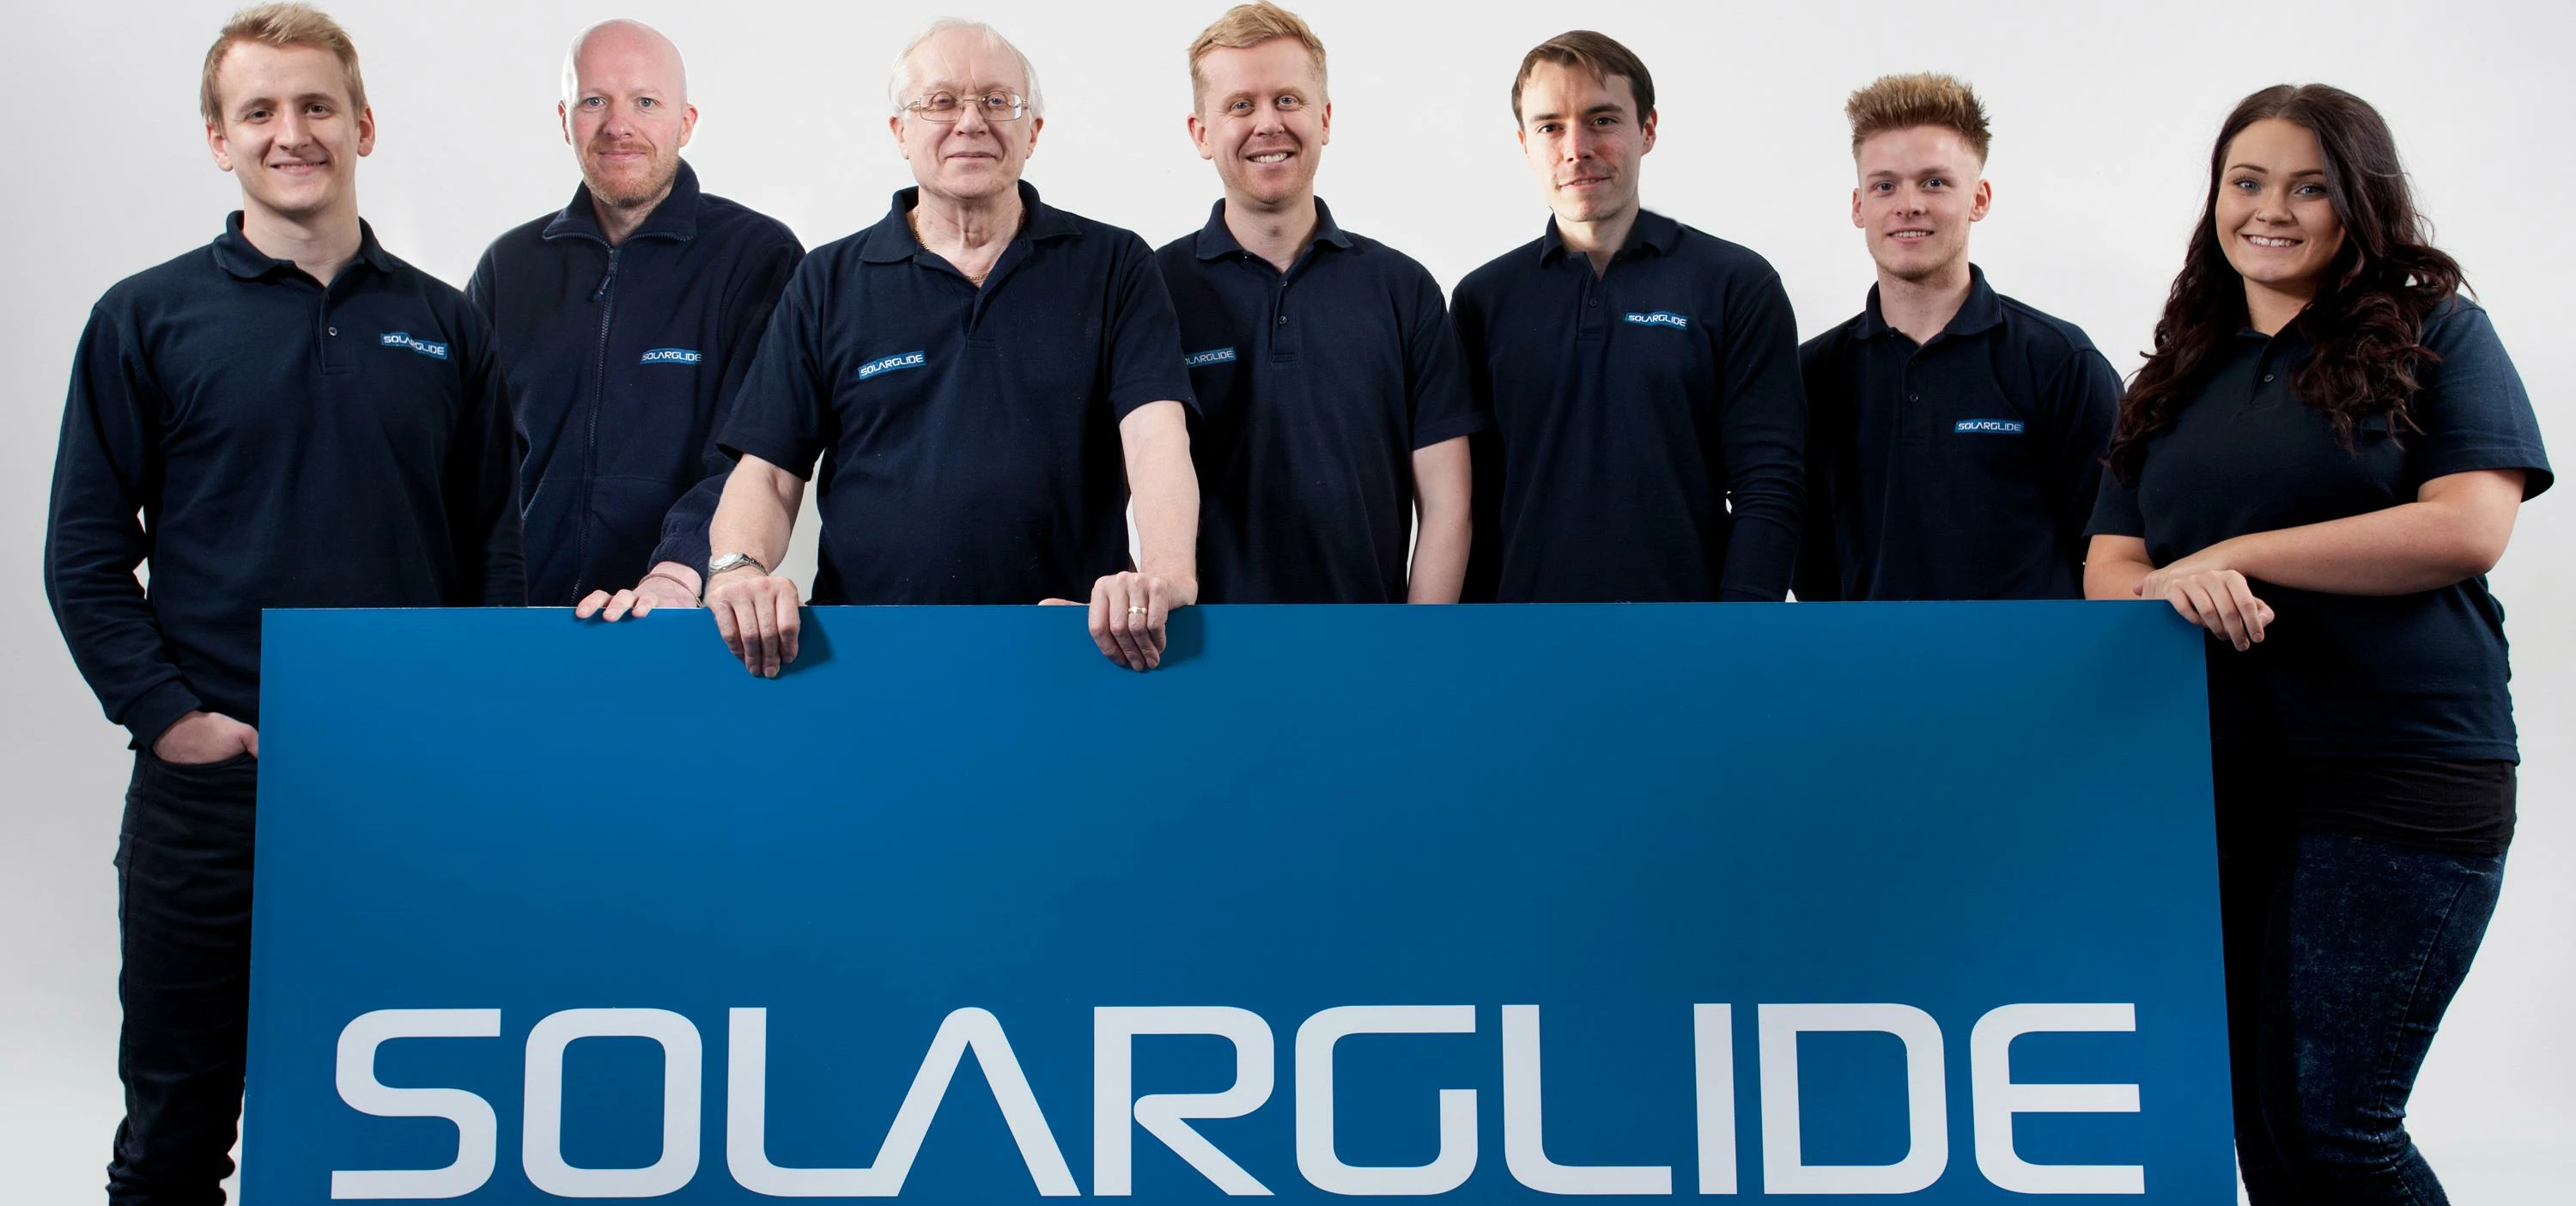 Solarglide Team - Official UK & Ireland Distributor of Vecom Marine Chemicals